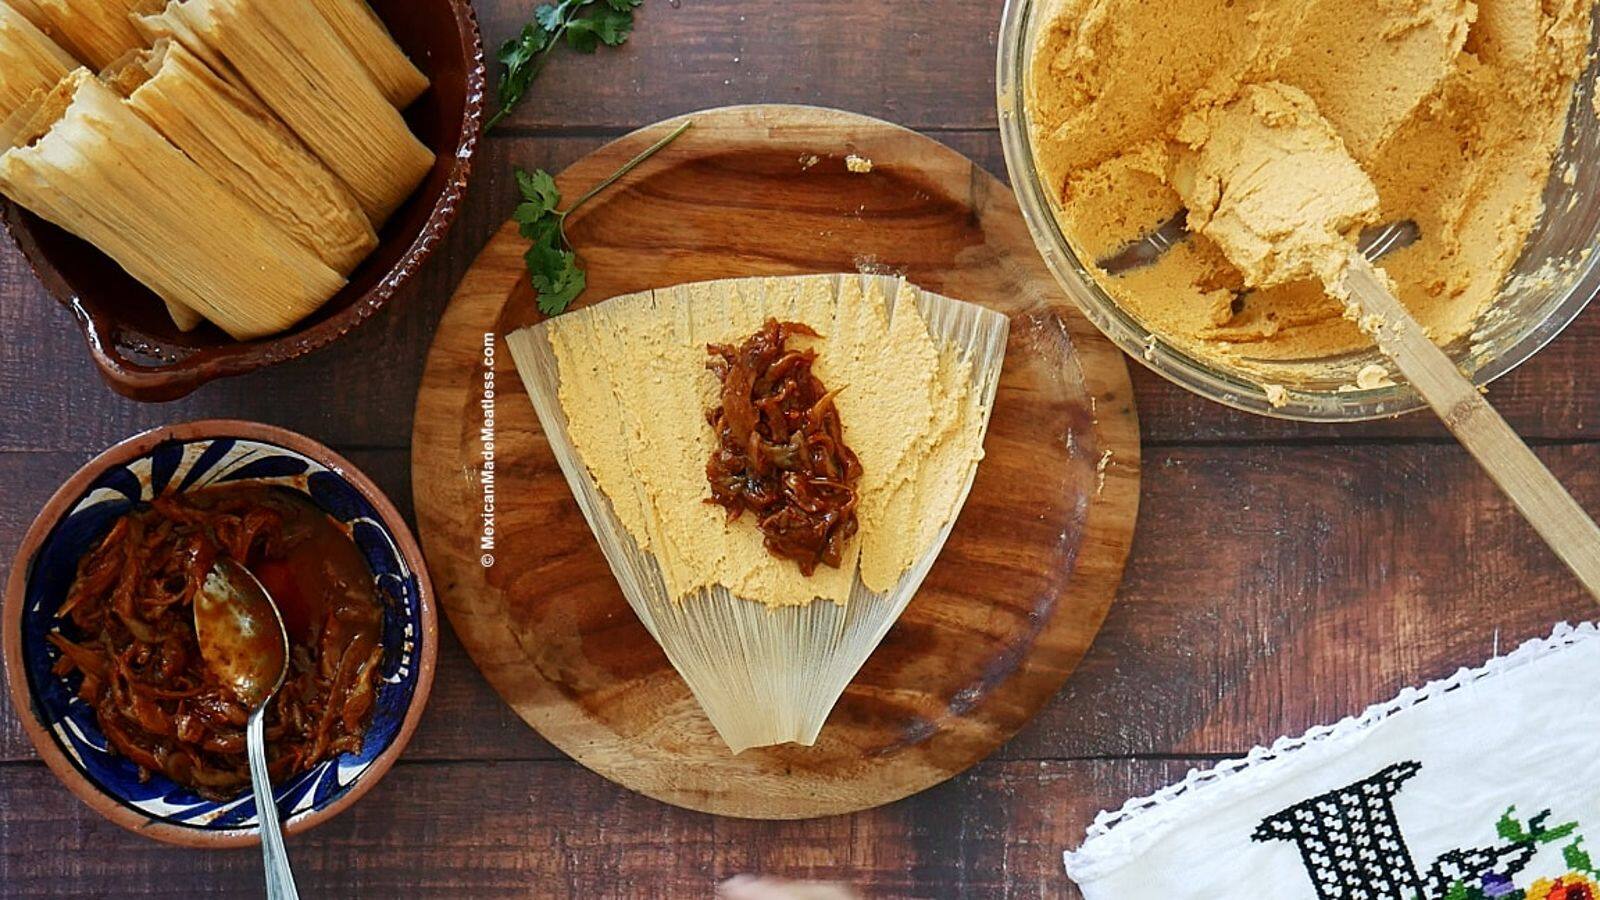 Impress your guests with this vegetarian Mexican tamales recipe